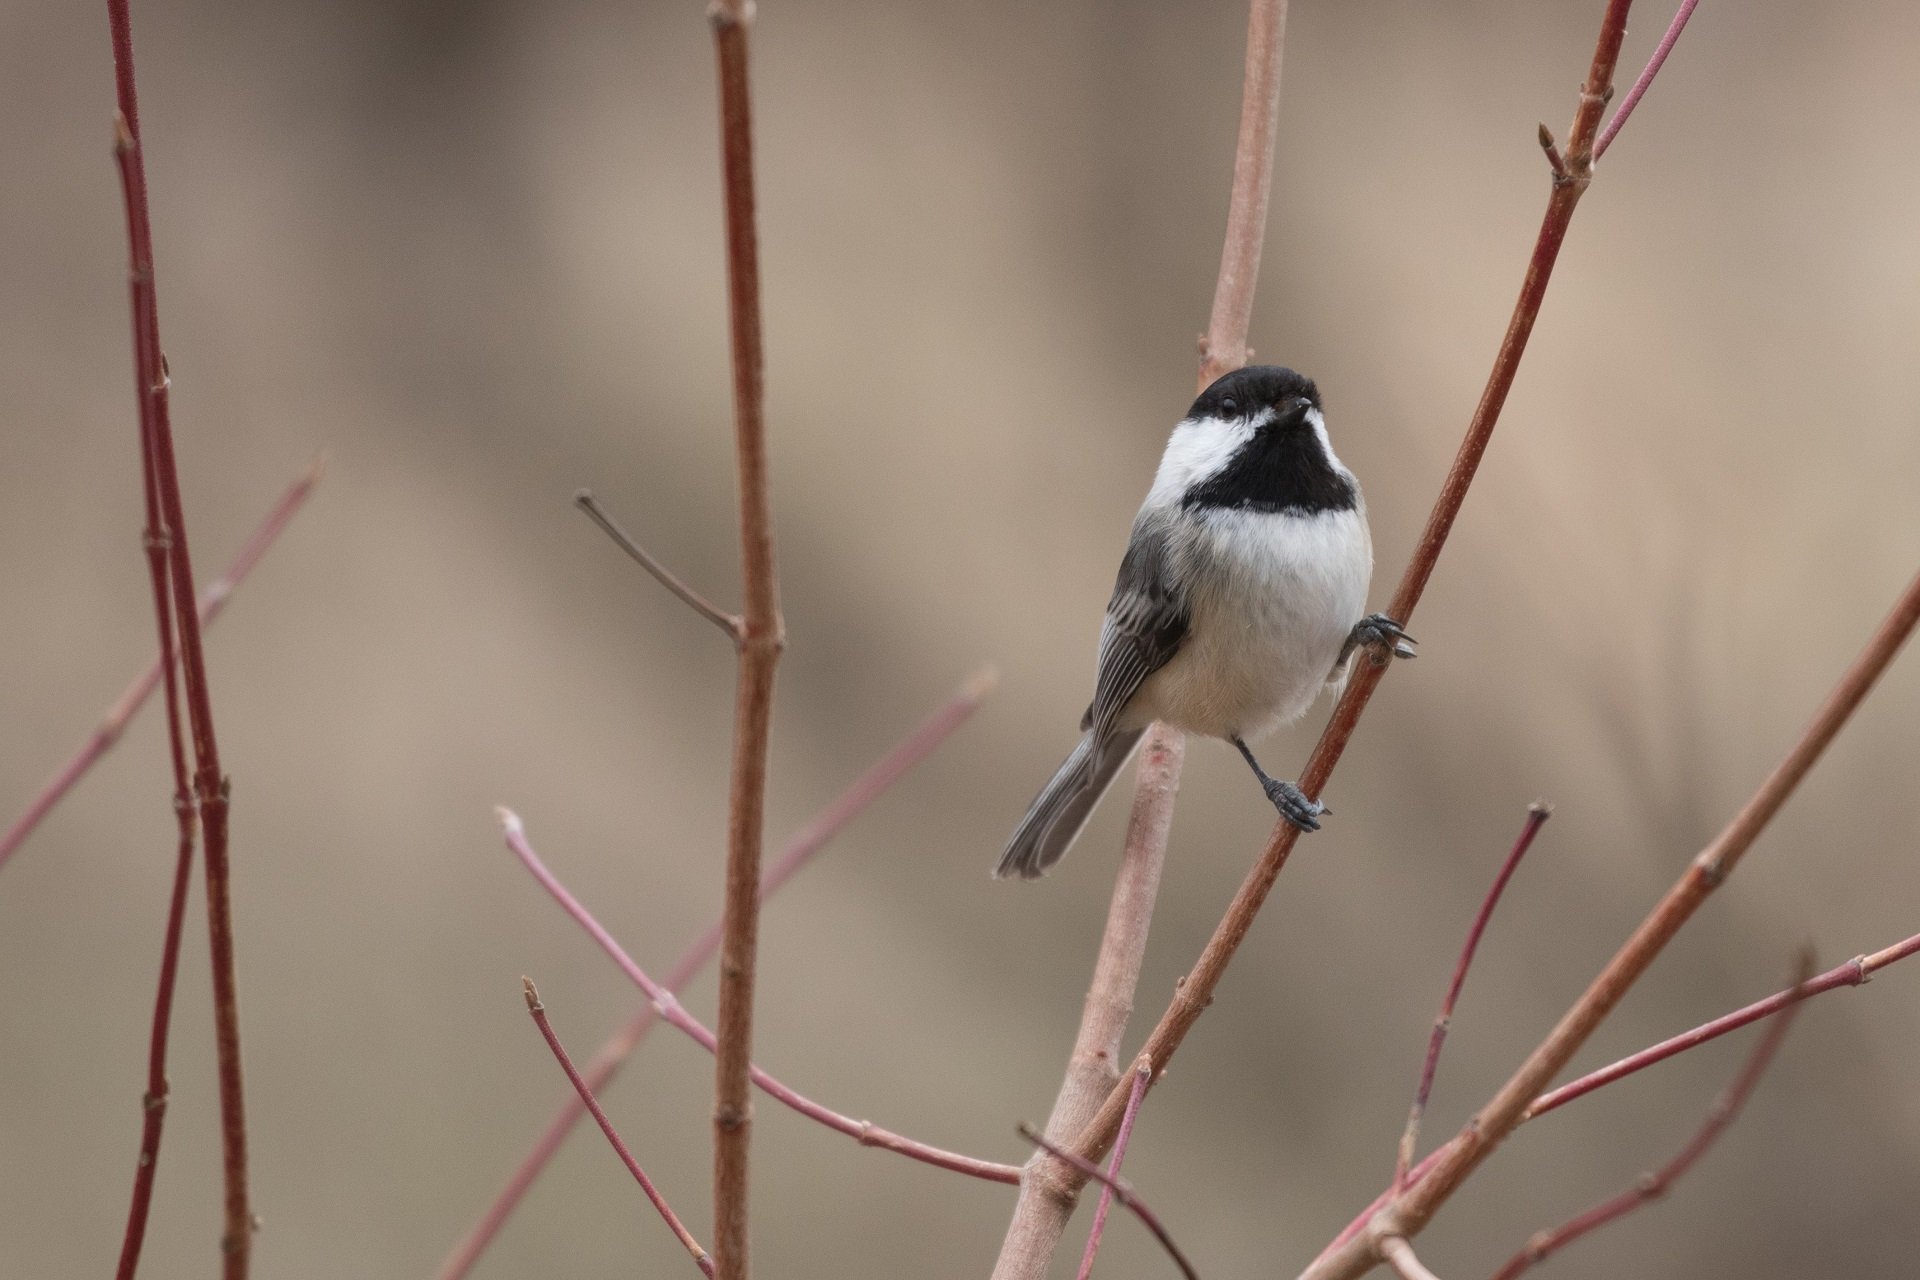 A Black-capped Chickadee perches on a bare branch.